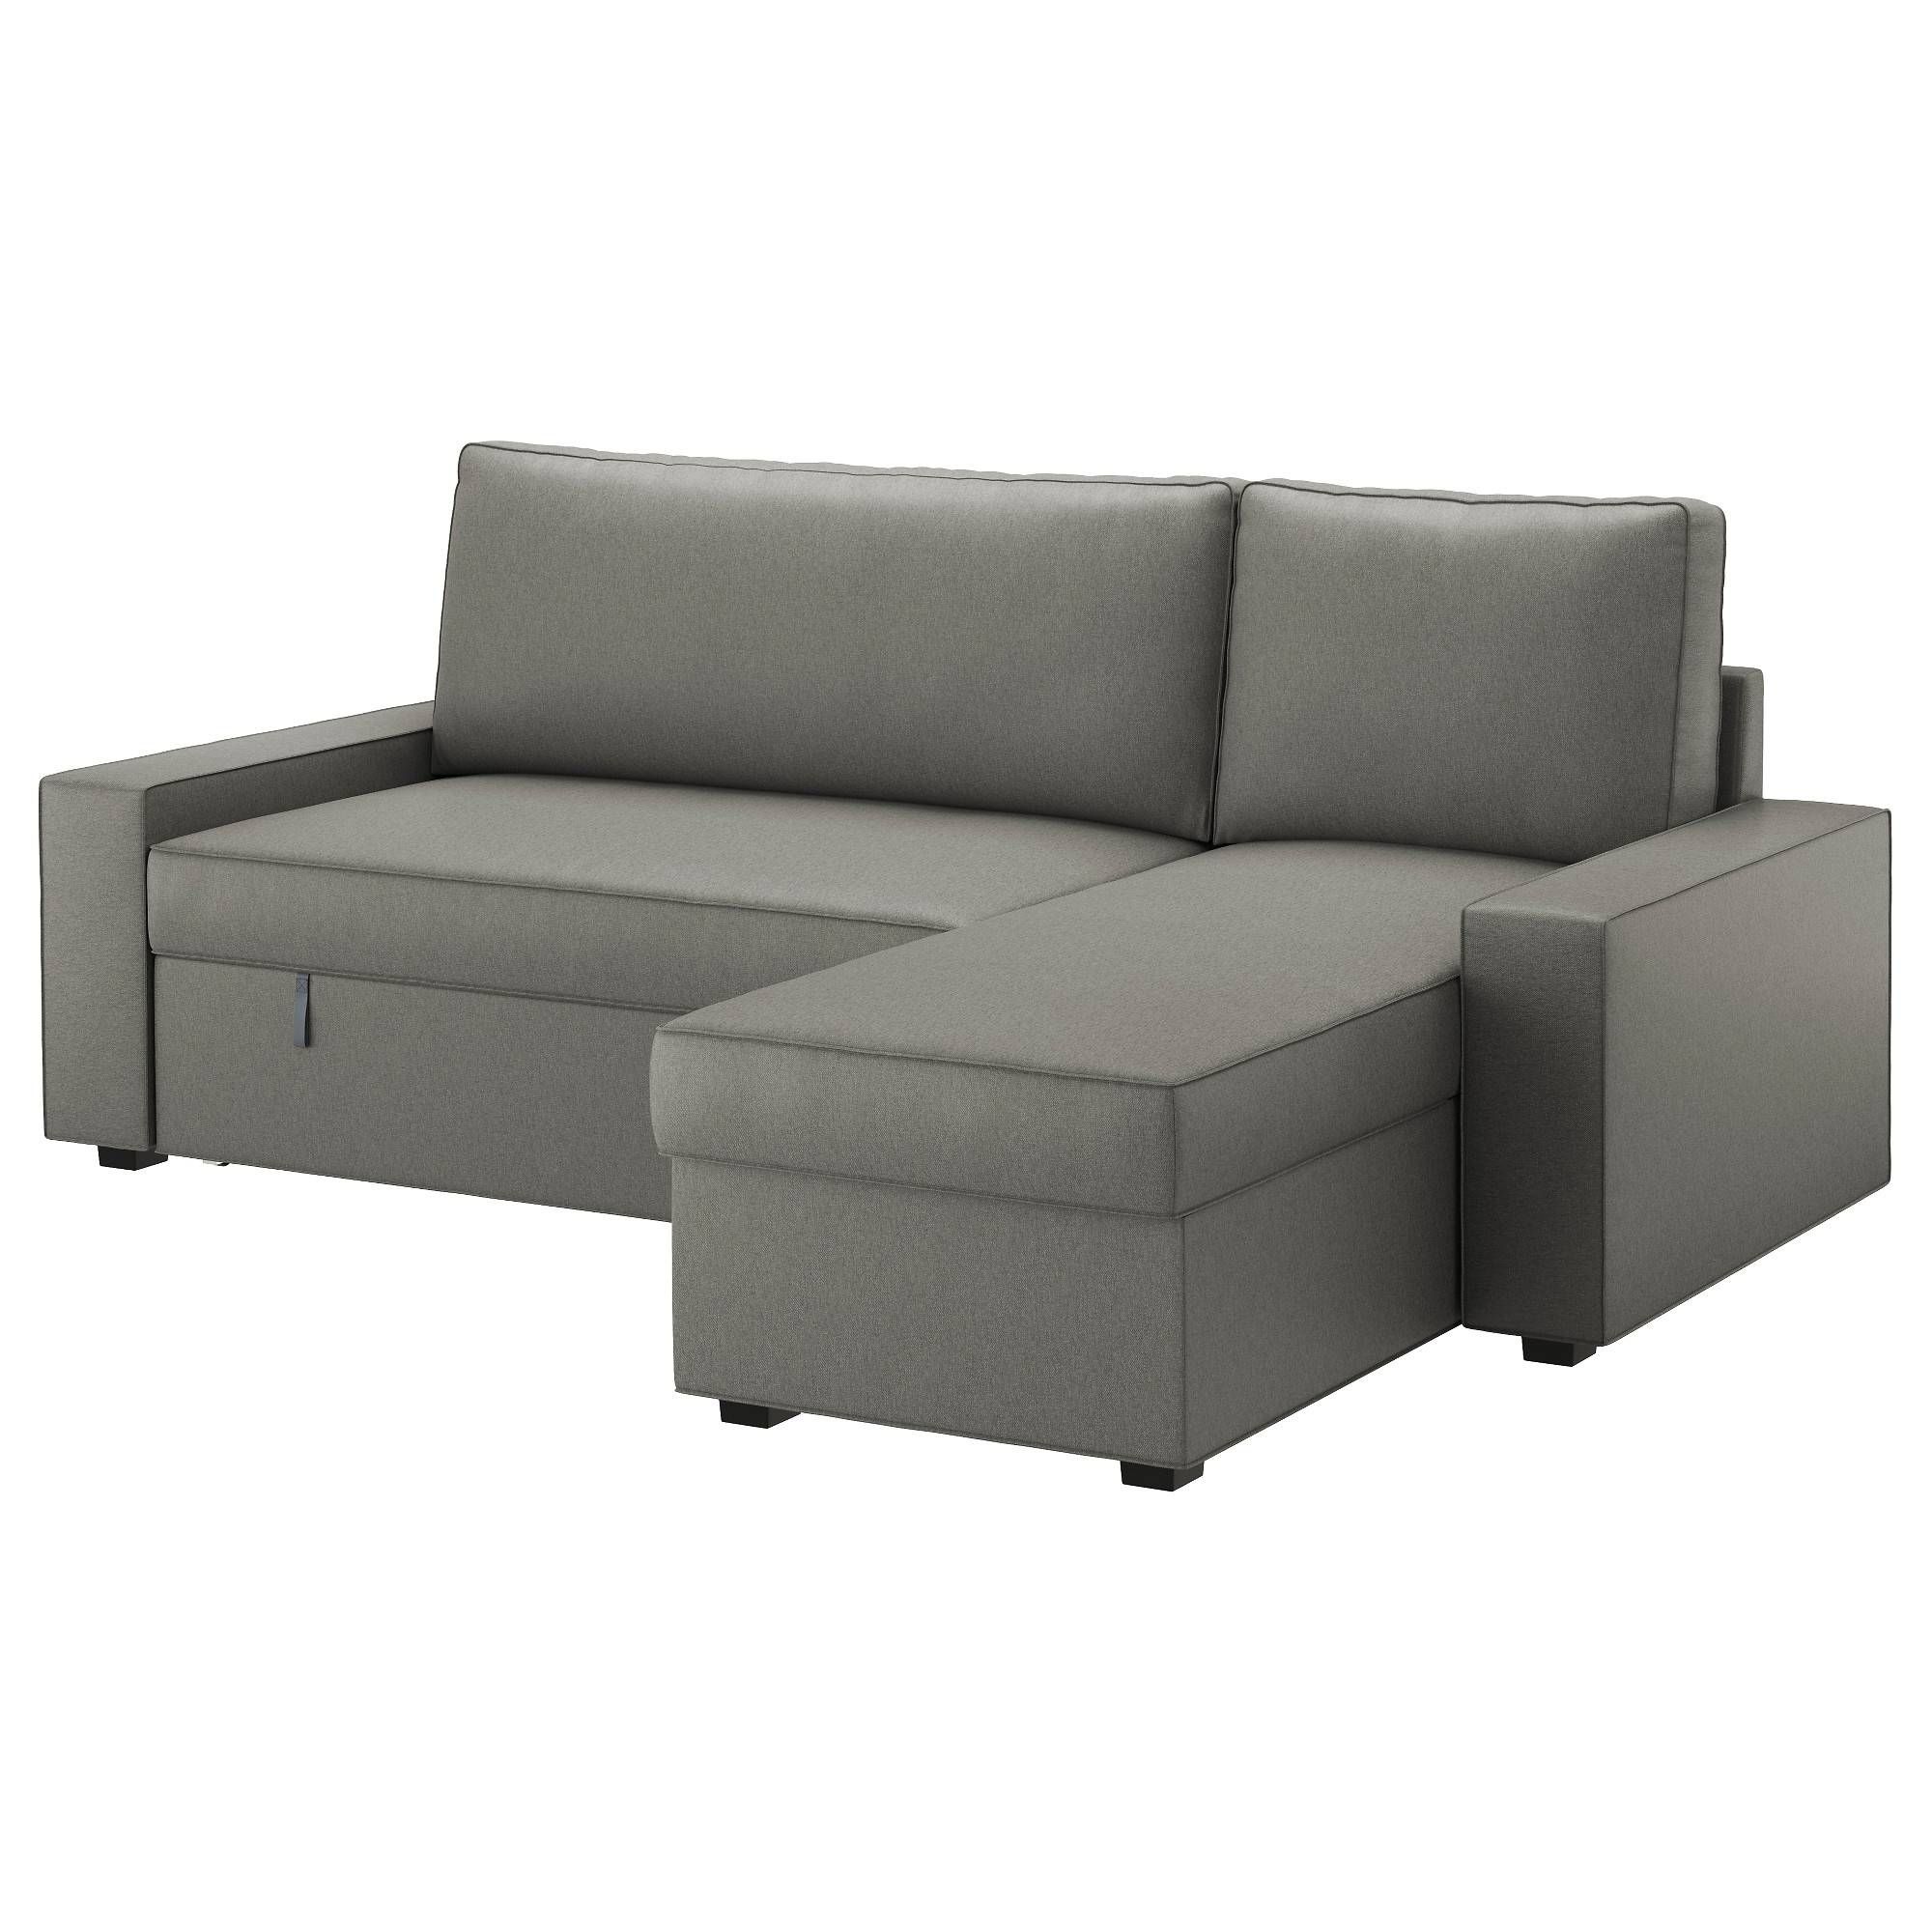 Vilasund Sofa Bed With Chaise Longue Borred Grey Green – Ikea With Regard To Chaise Longue Sofa Beds (Photo 1 of 15)